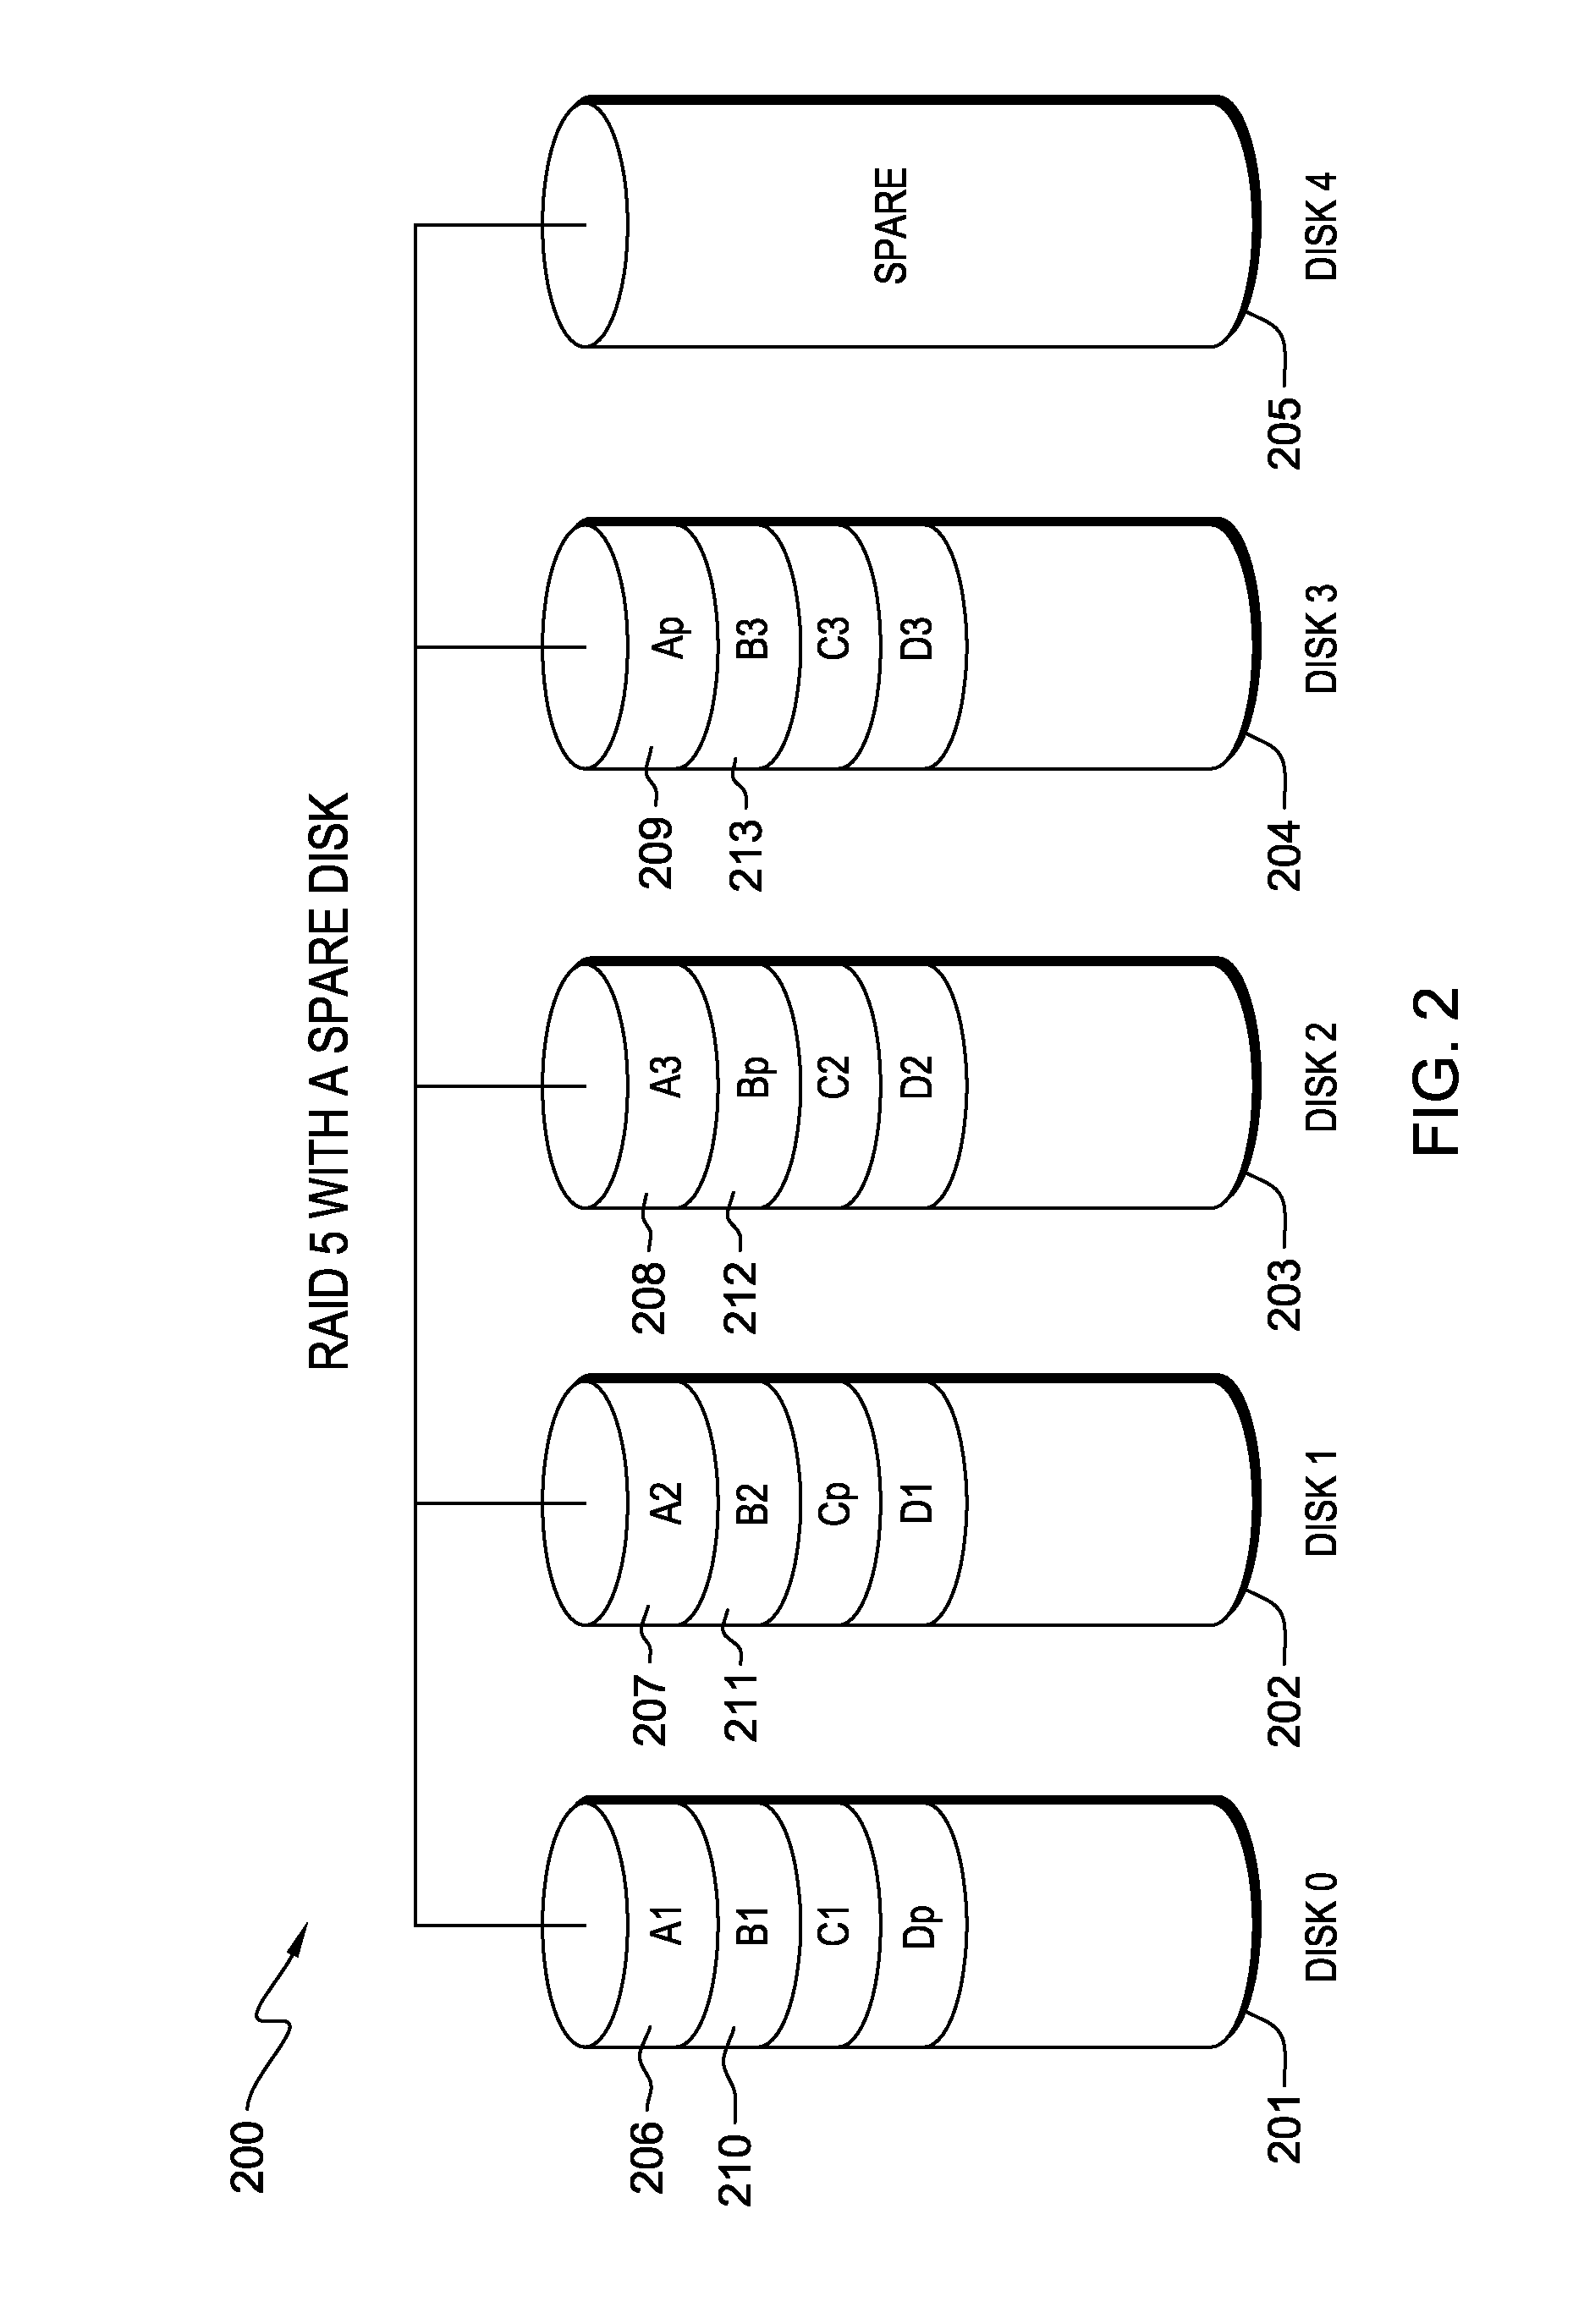 Preventing unrecoverable errors during a disk regeneration in a disk array